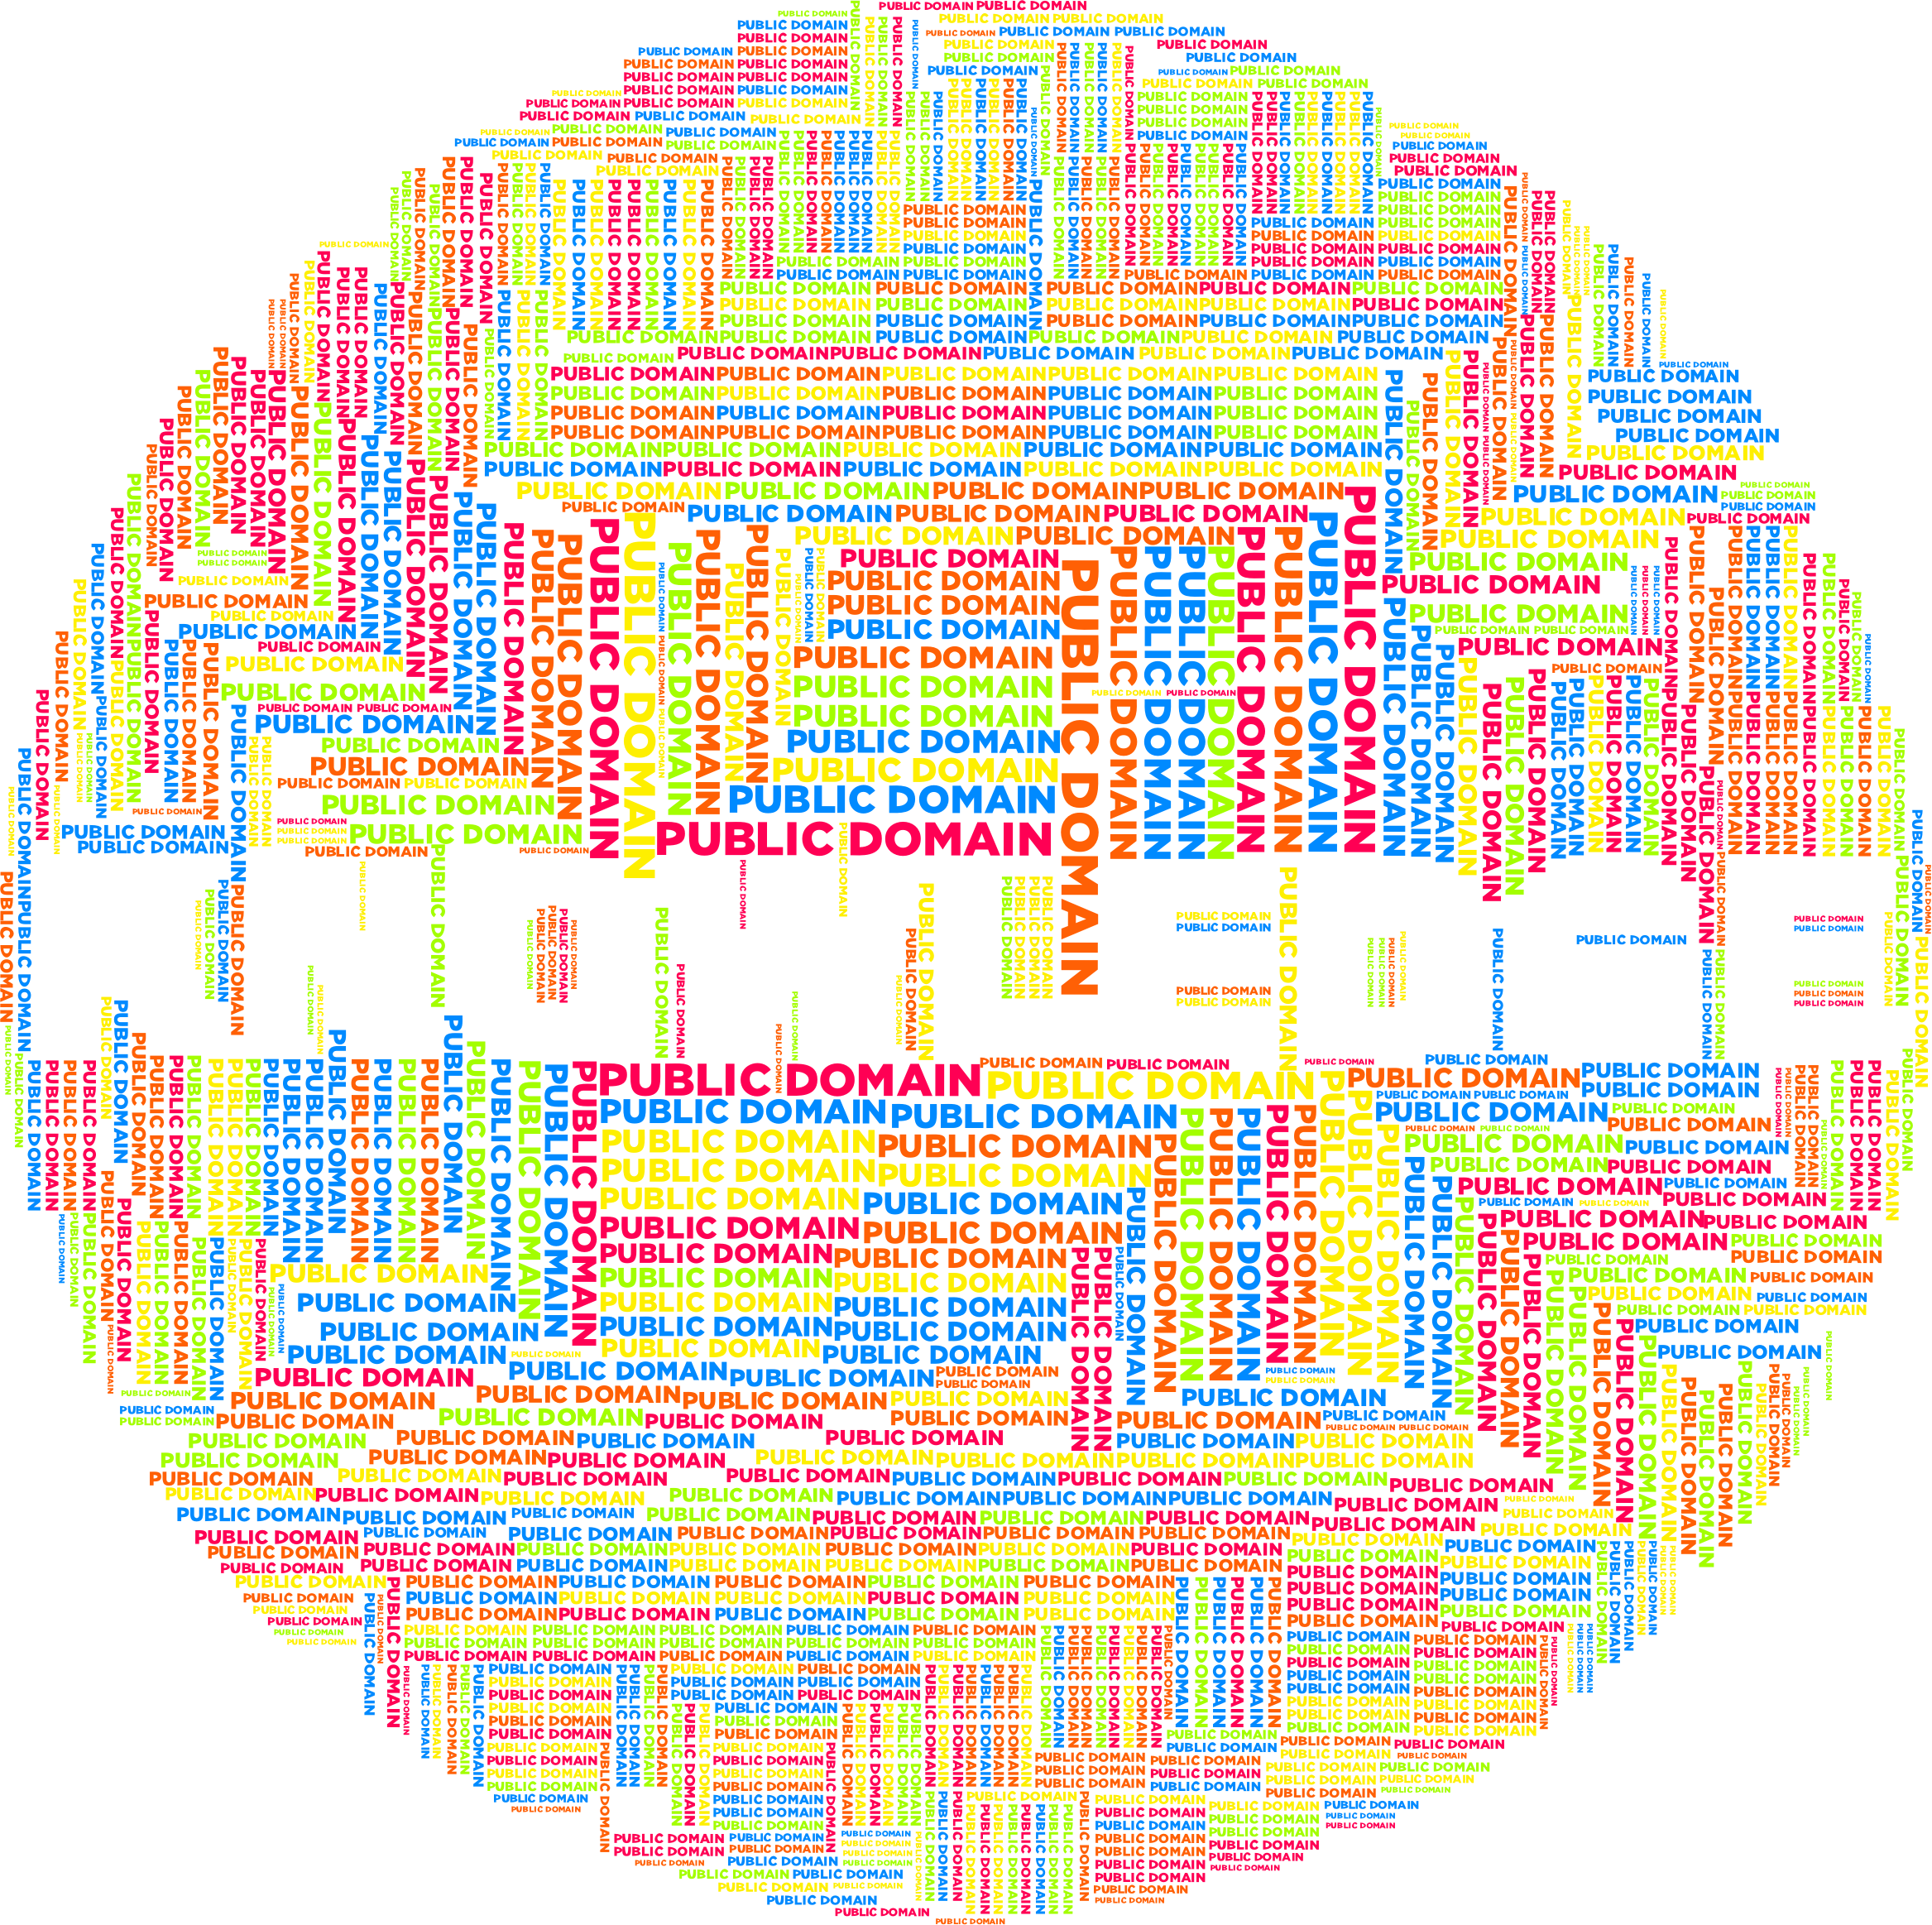 knowledge clipart world knowledge